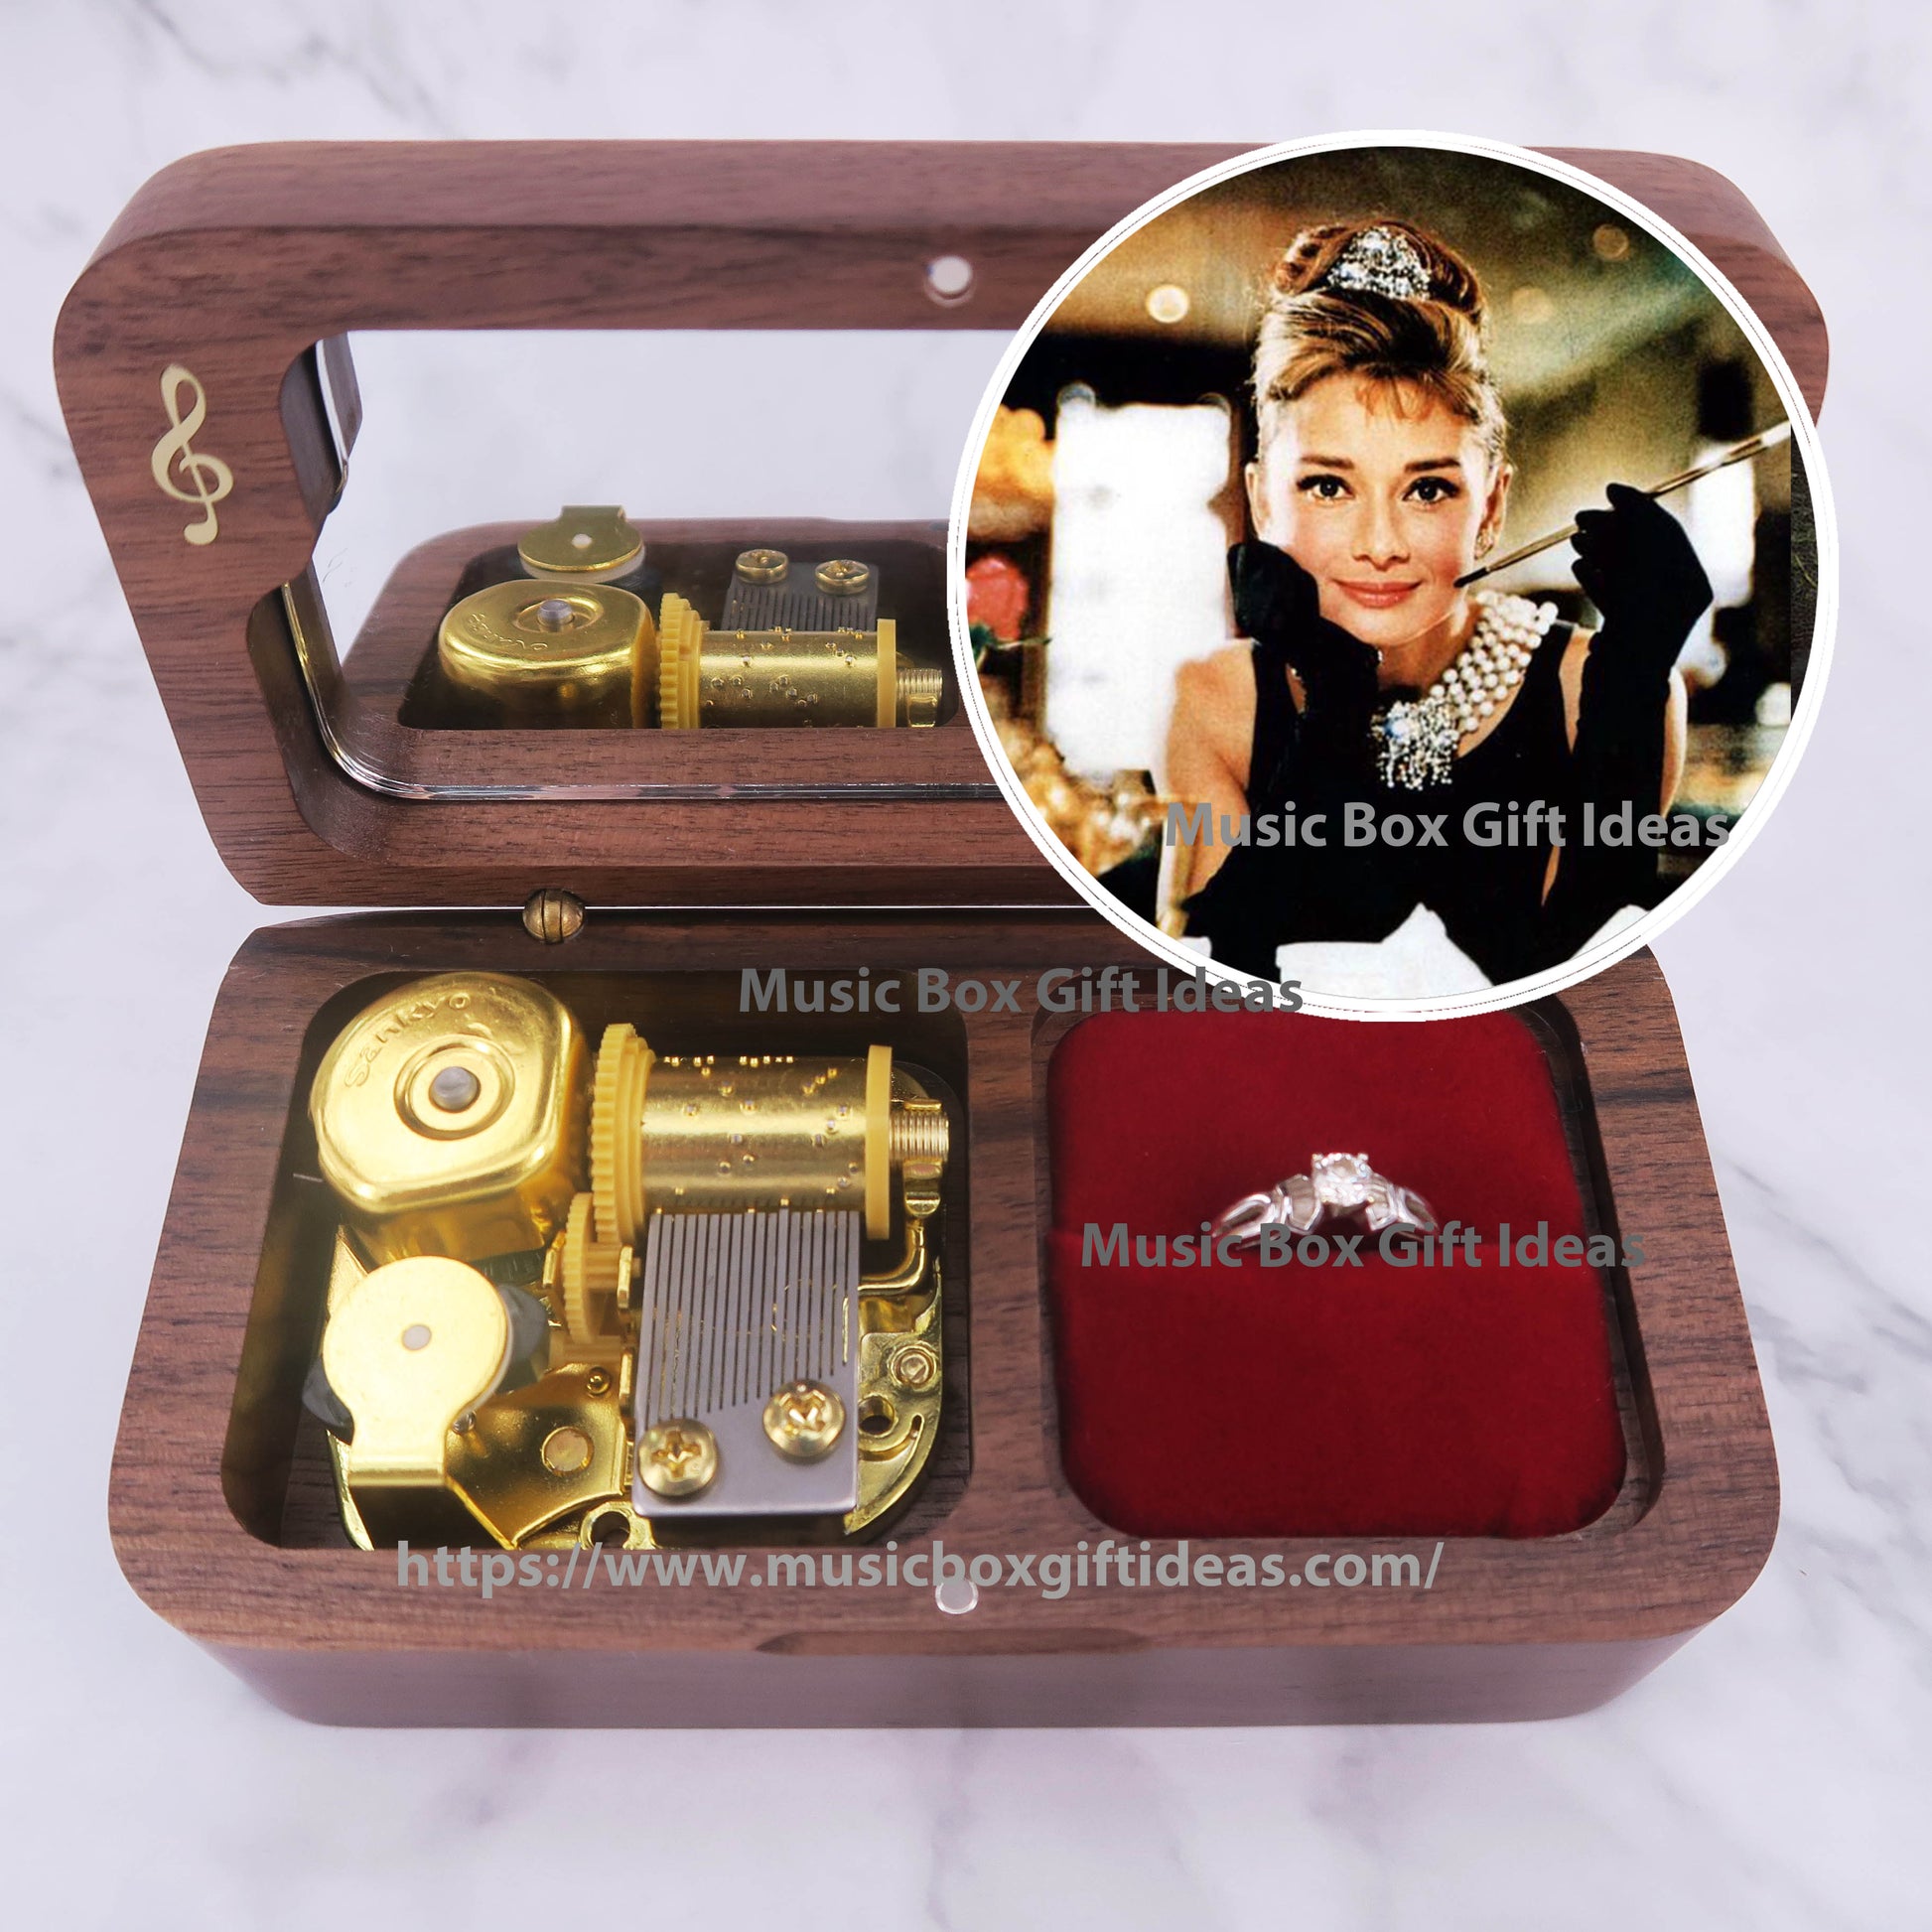 Breakfast at Tiffany's Soundtrack Moon River Audrey Hepburn 18-Note Jewelry Music Box Gift (Wooden Clockwork) - Music Box Gift Ideas